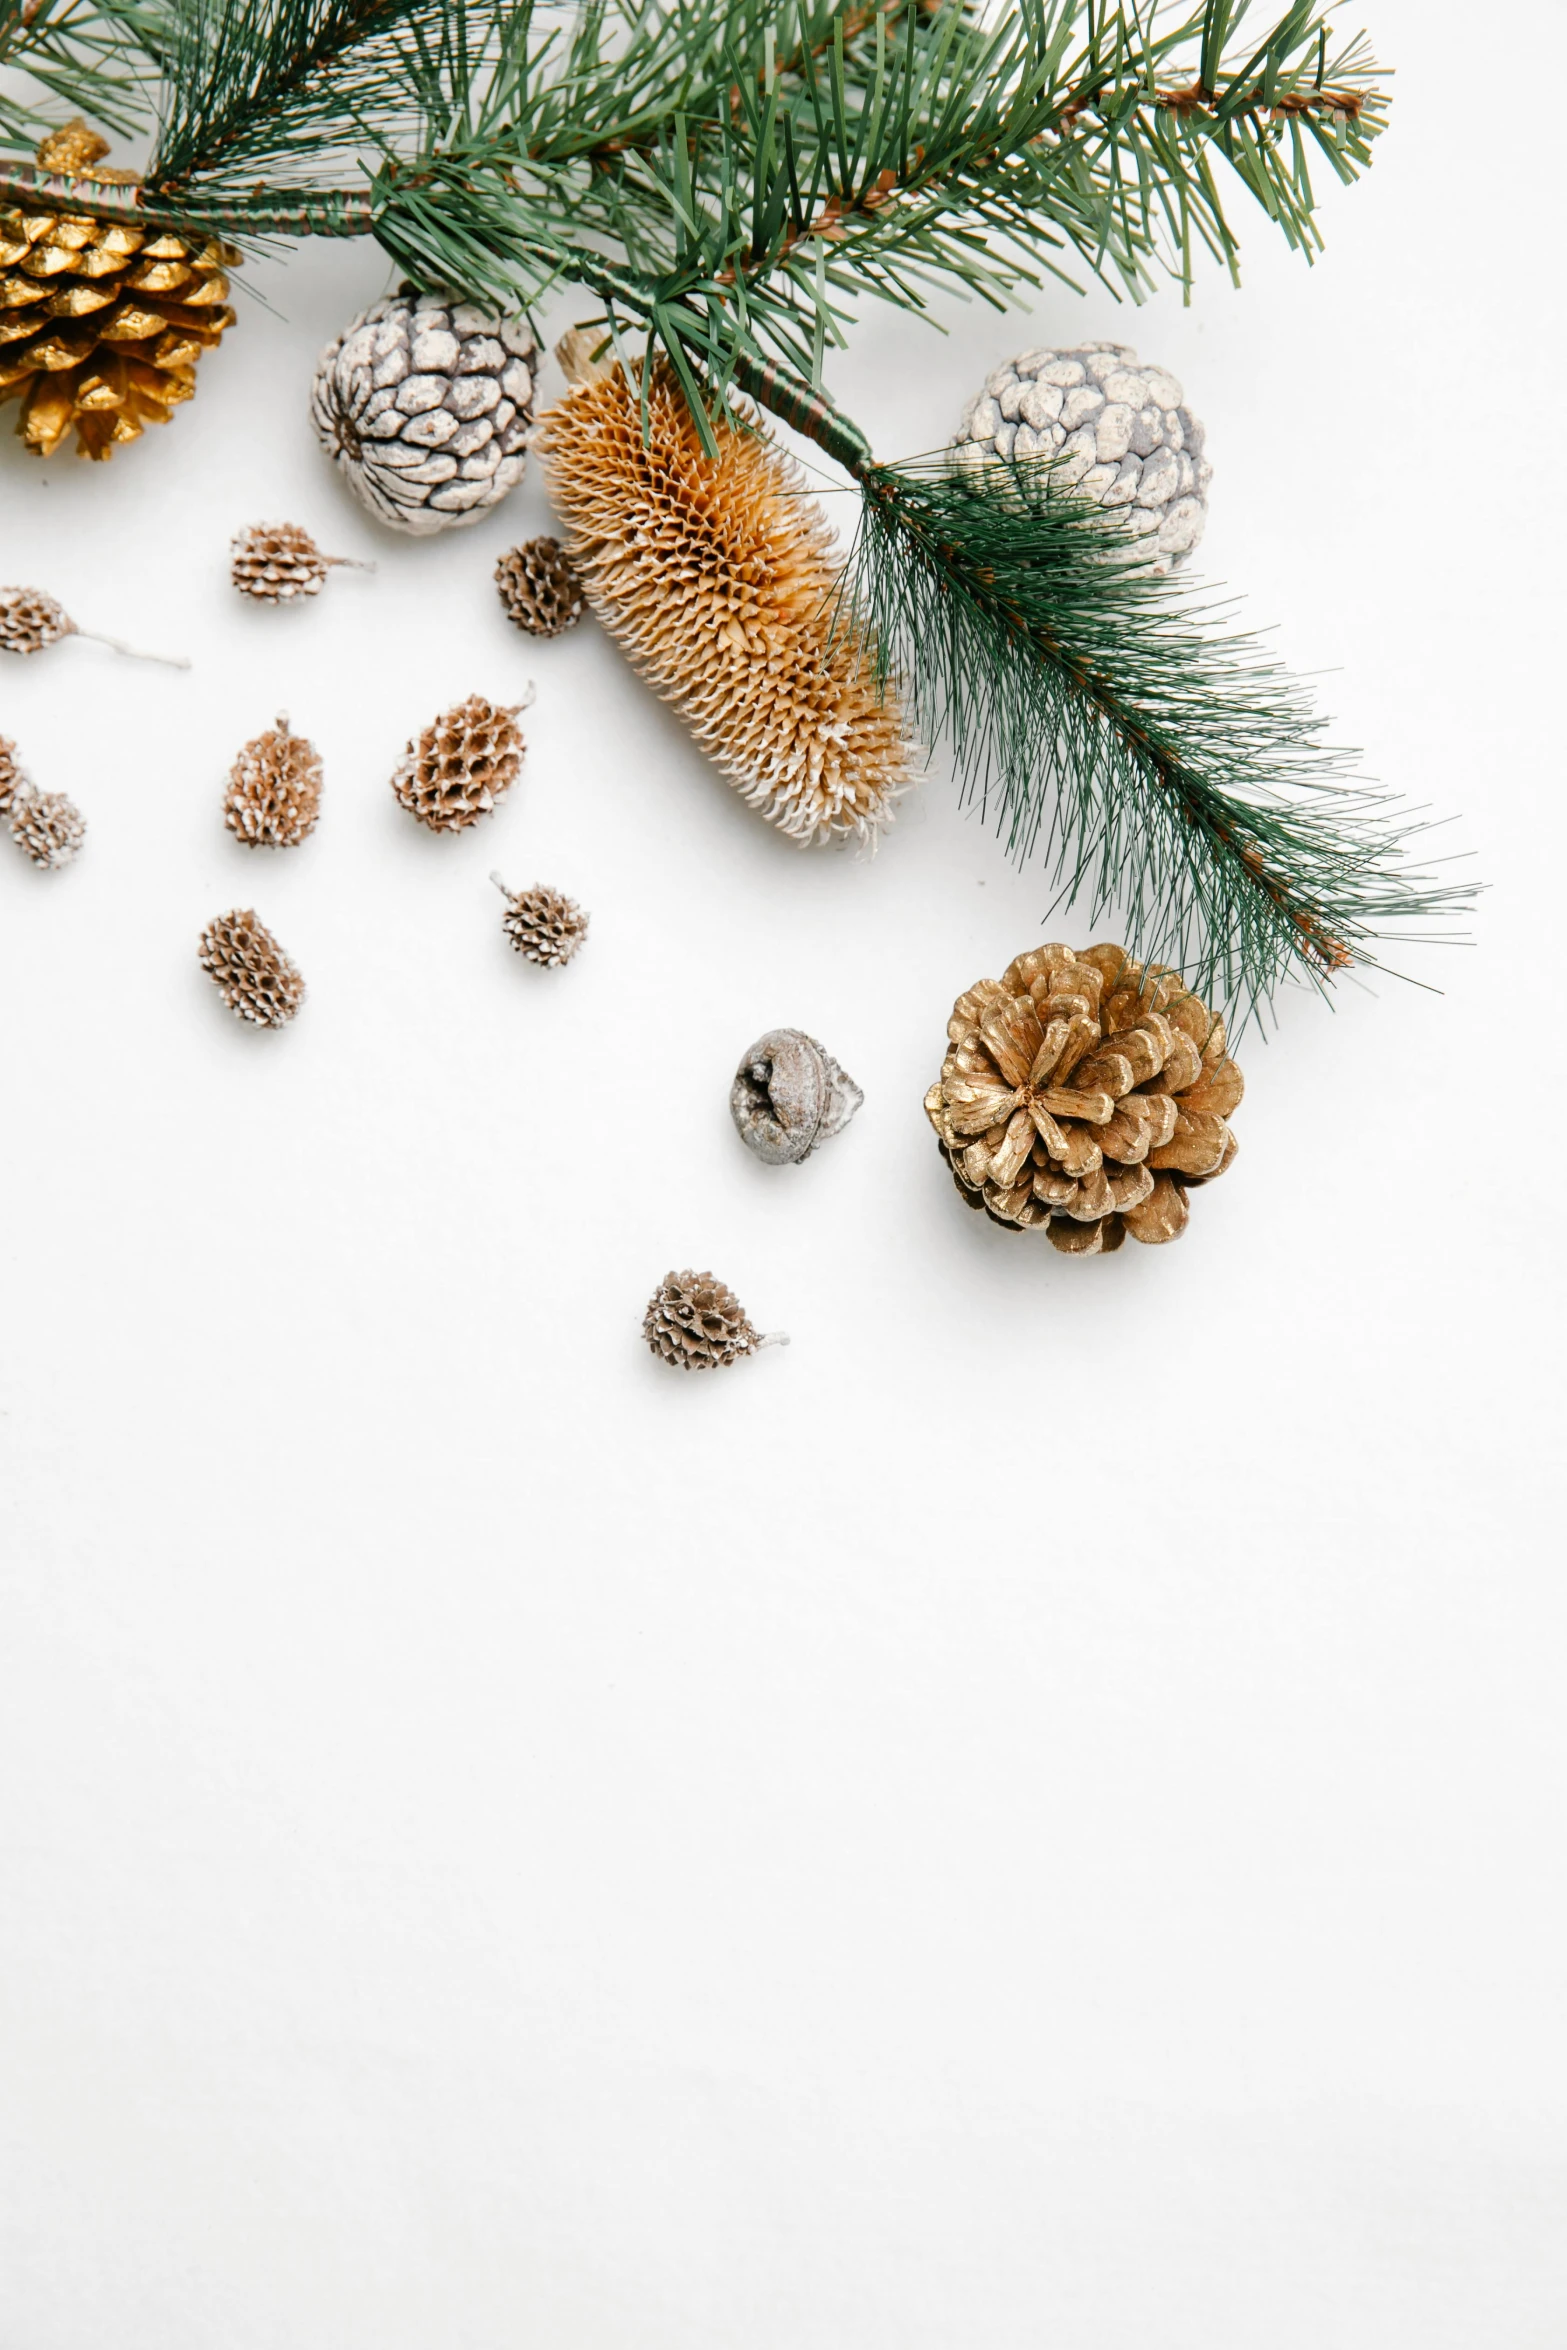 pine cones and pine branches on a white background, by Andries Stock, trending on unsplash, silver with gold accents, 15081959 21121991 01012000 4k, miniatures, ilustration